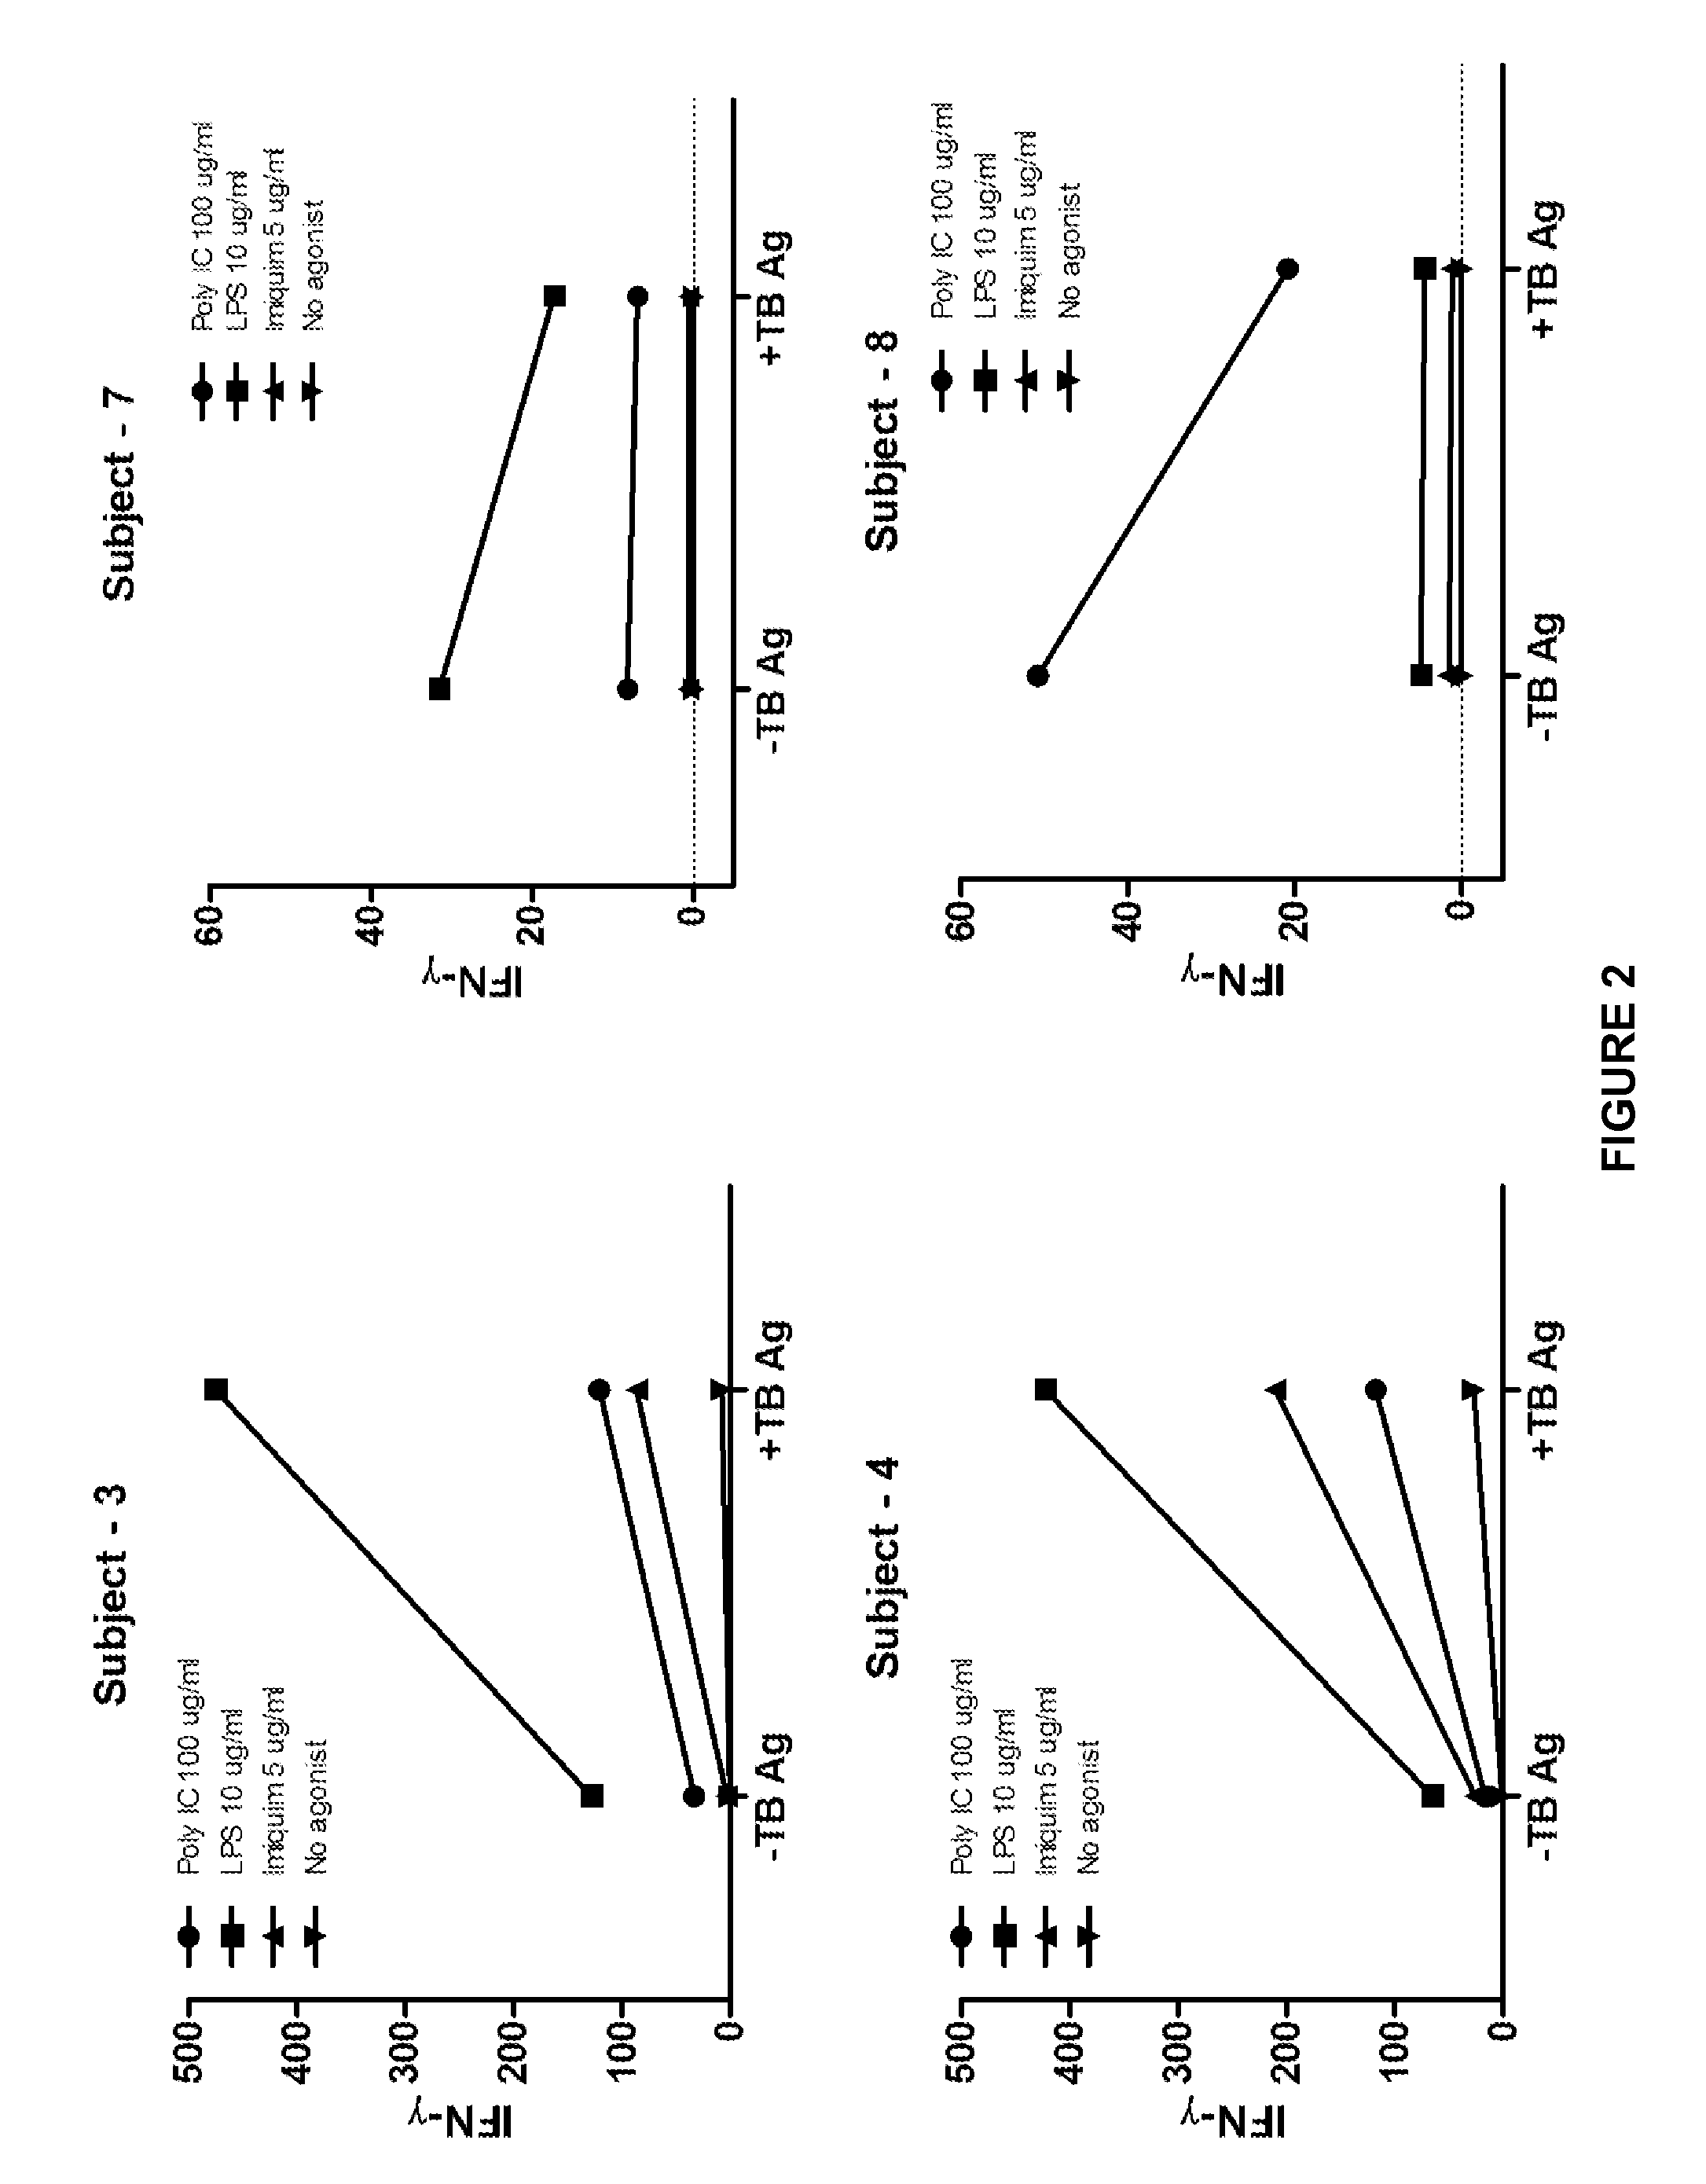 Immunomodulation of functional T cell assays for diagnosis of infectious or autoimmune disorders